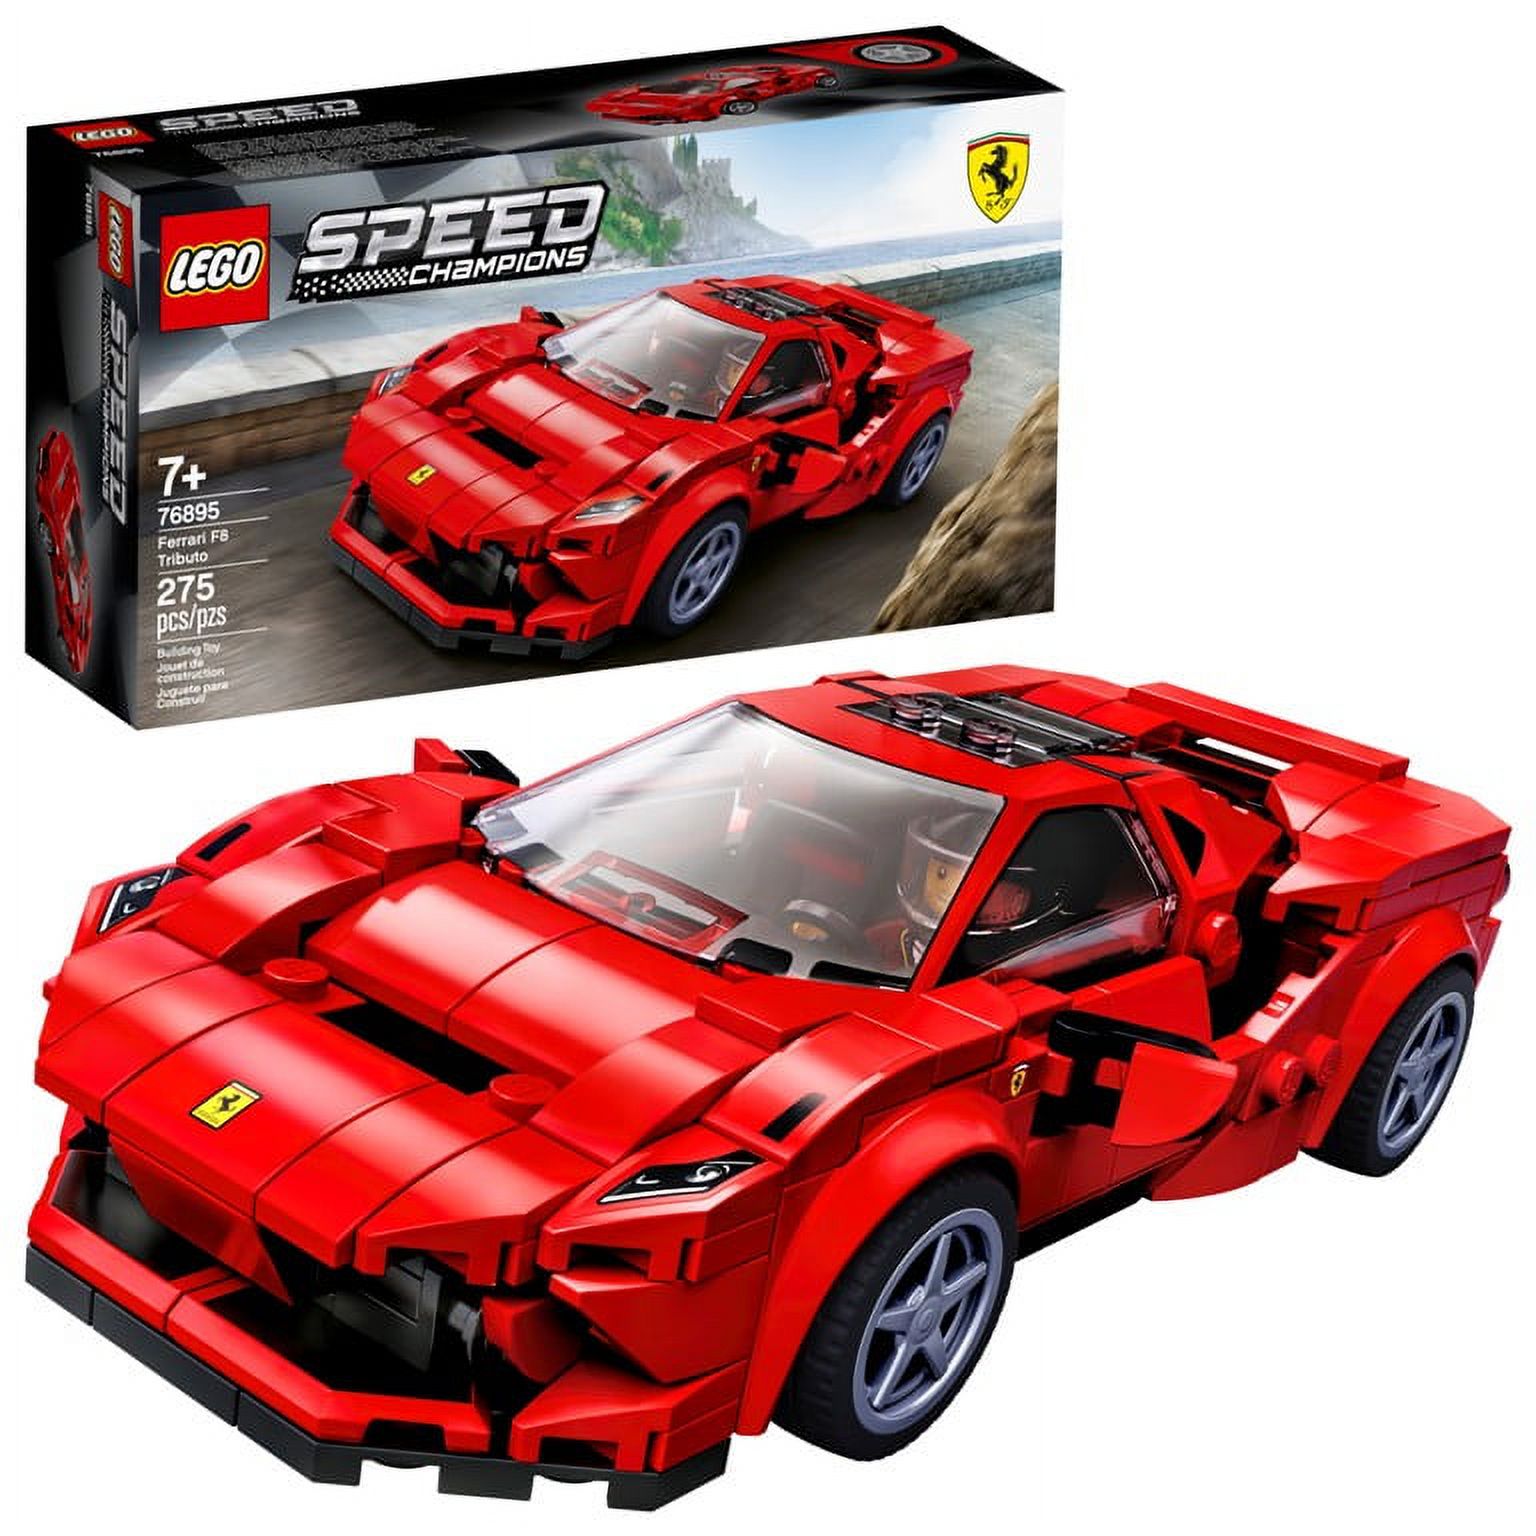 LEGO Speed Champions 76895 Ferrari F8 Tributo Racing Model Car, Vehicle Building Car (275 pieces) - image 1 of 12